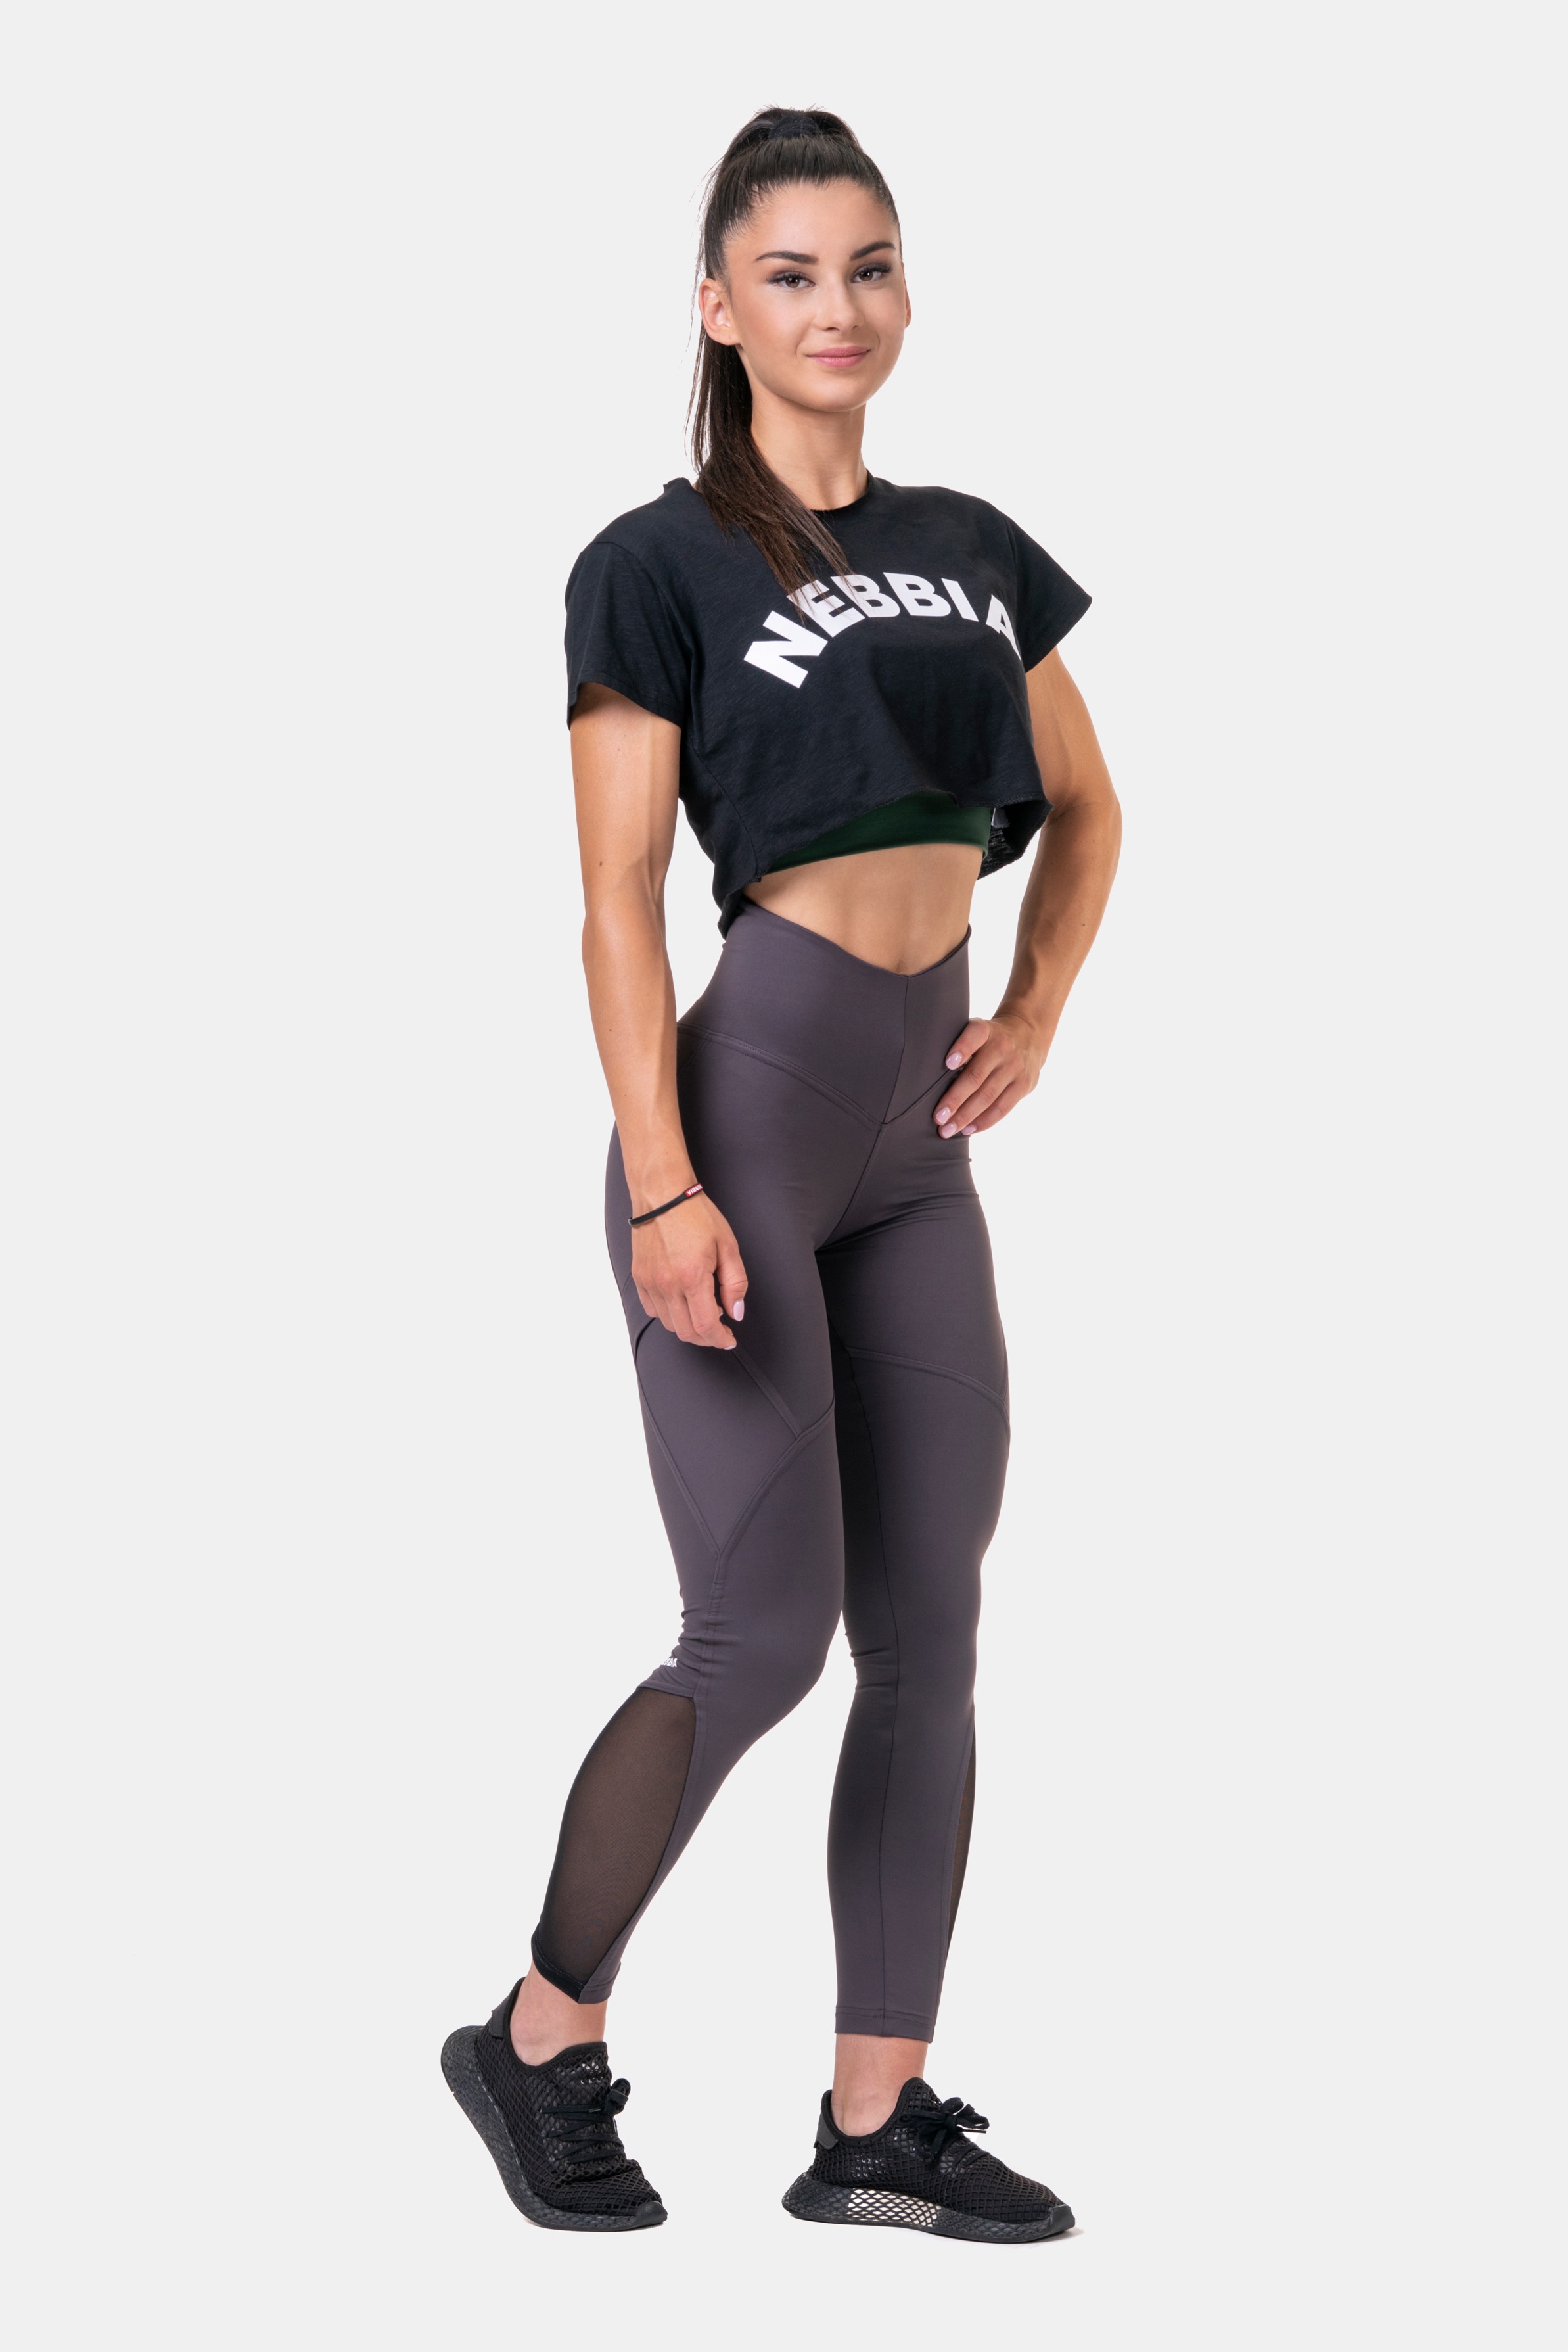 nebbia-laza-crop-top-fit-and-sporty-583-black